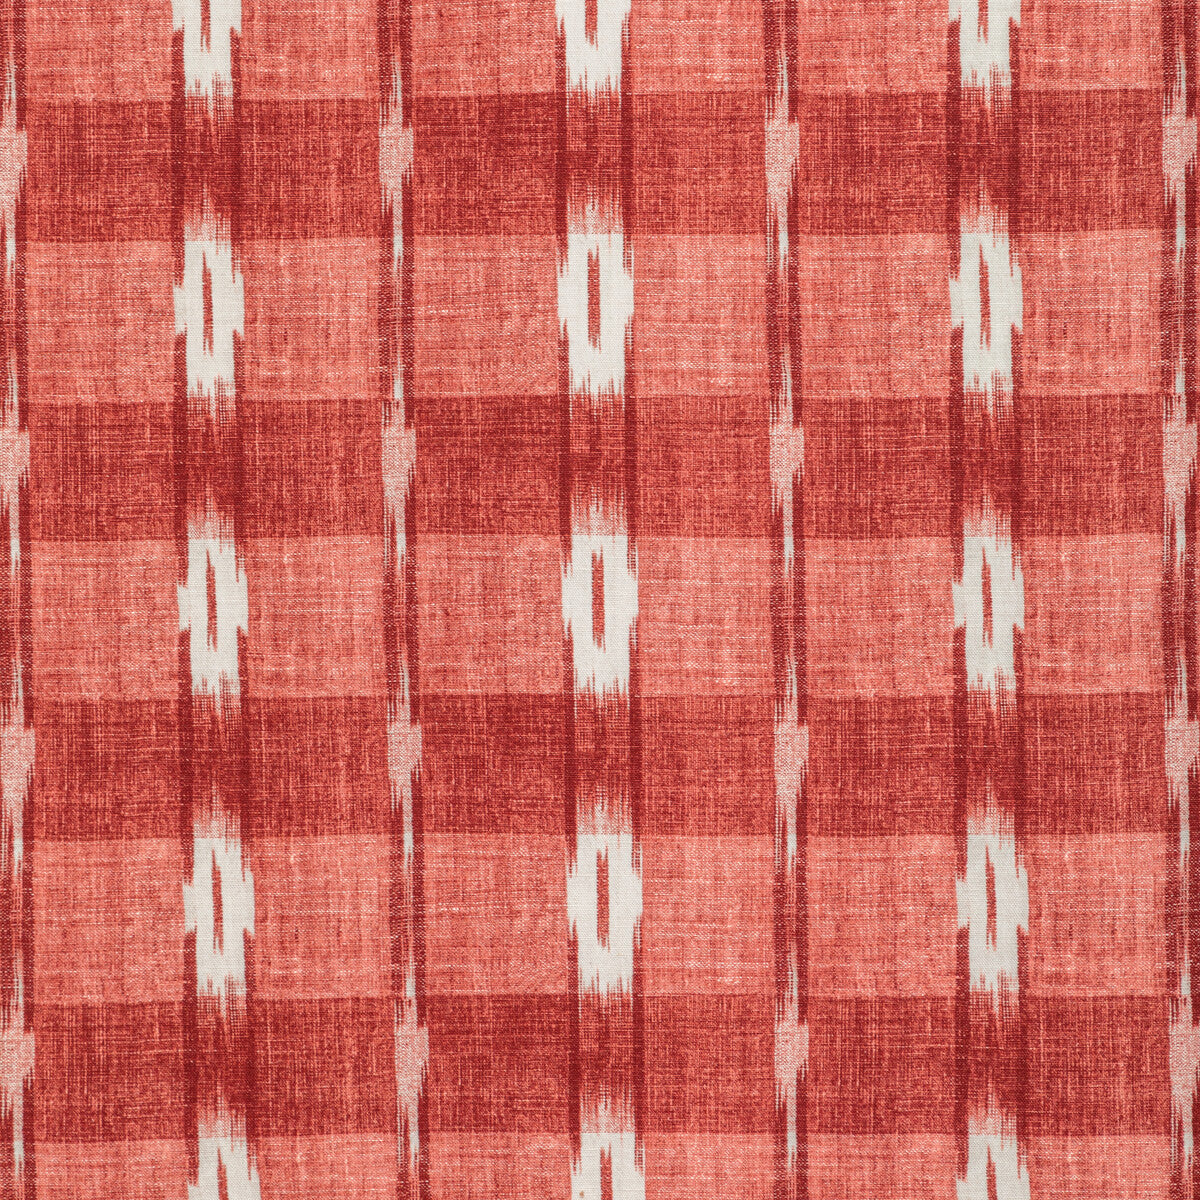 Girard Print fabric in red color - pattern 8022106.19.0 - by Brunschwig &amp; Fils in the Manoir collection